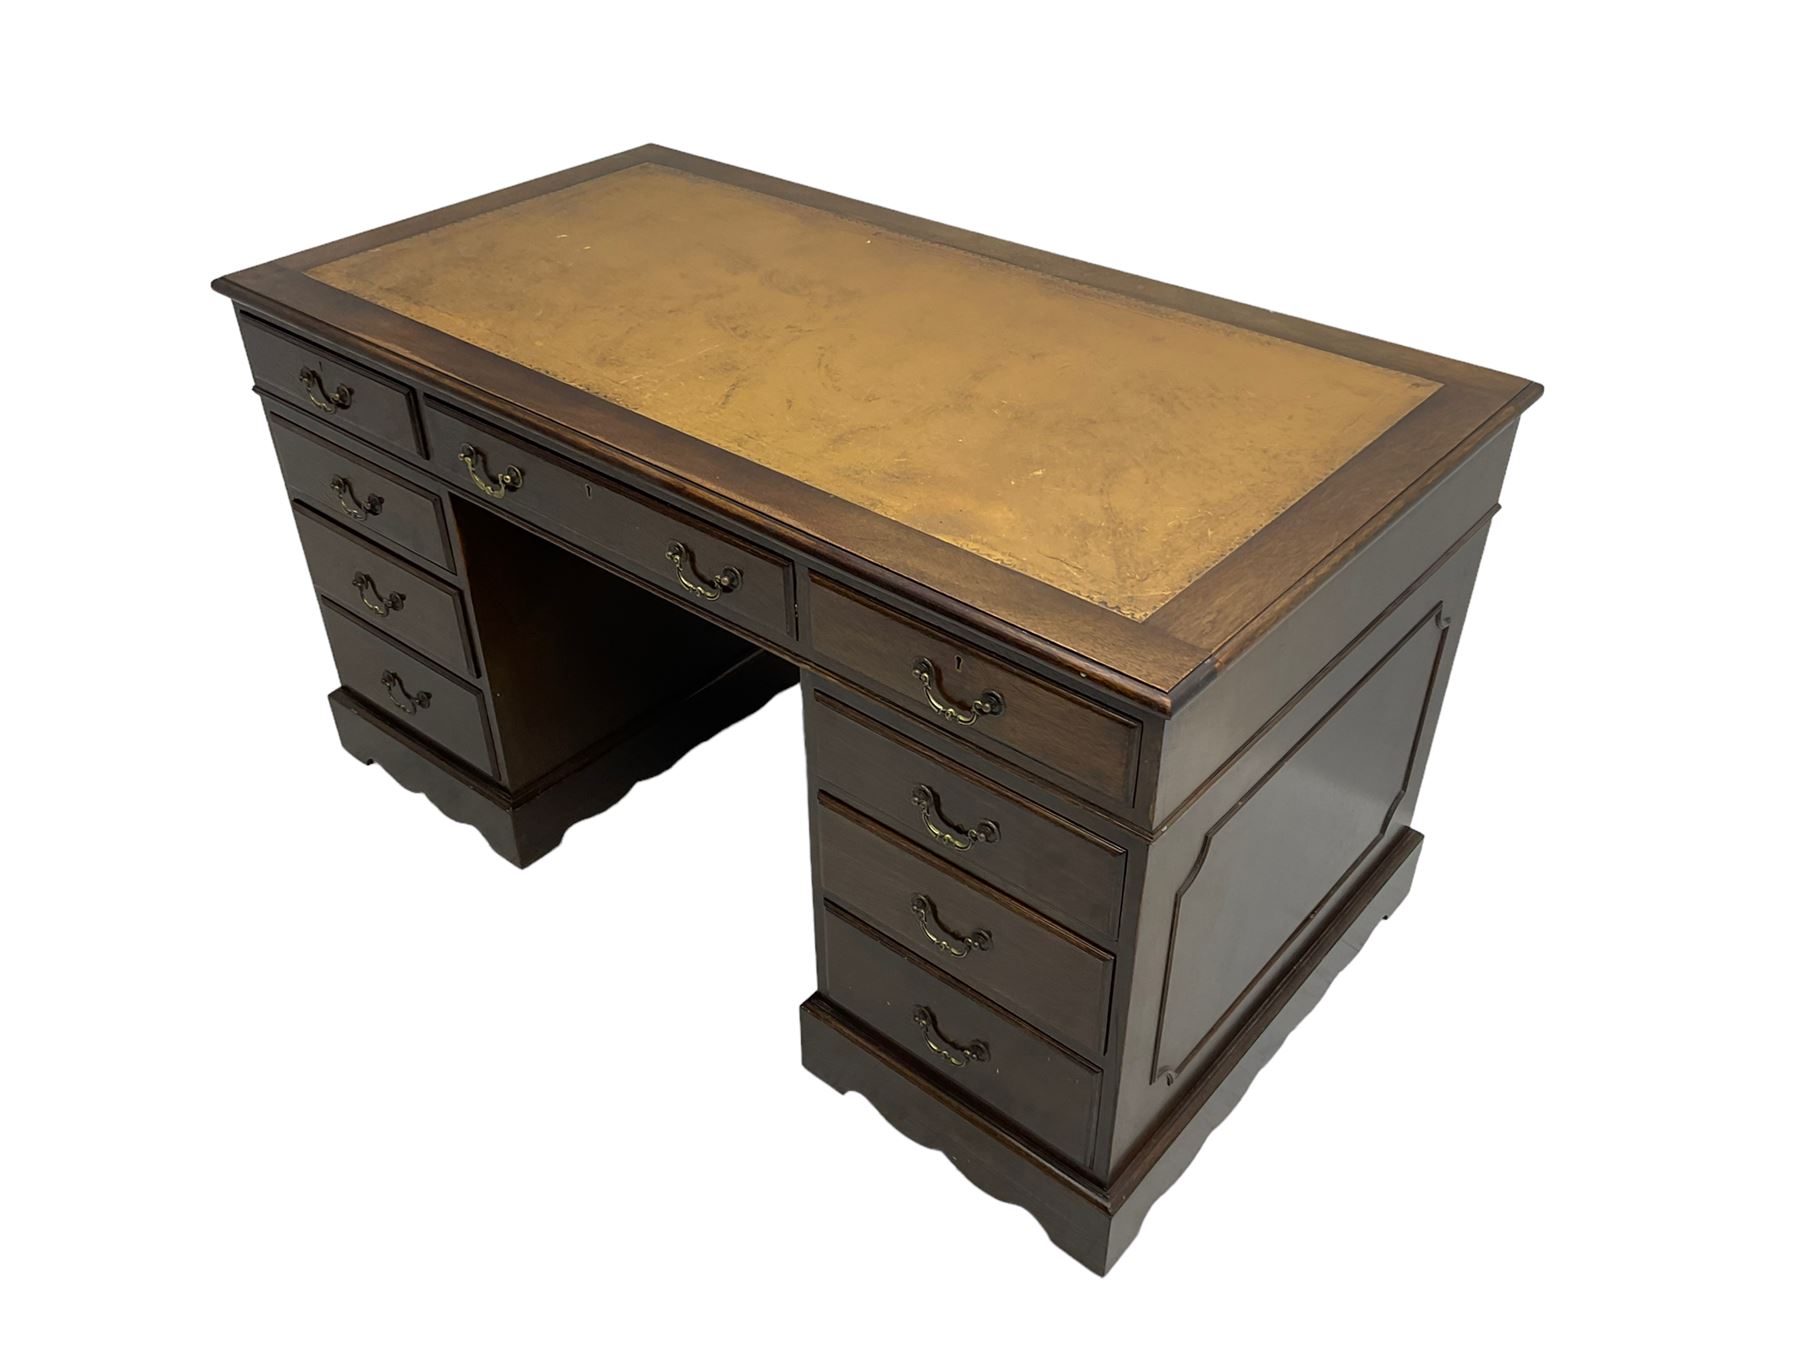 Early 20th century mahogany twin pedestal desk - Image 3 of 6